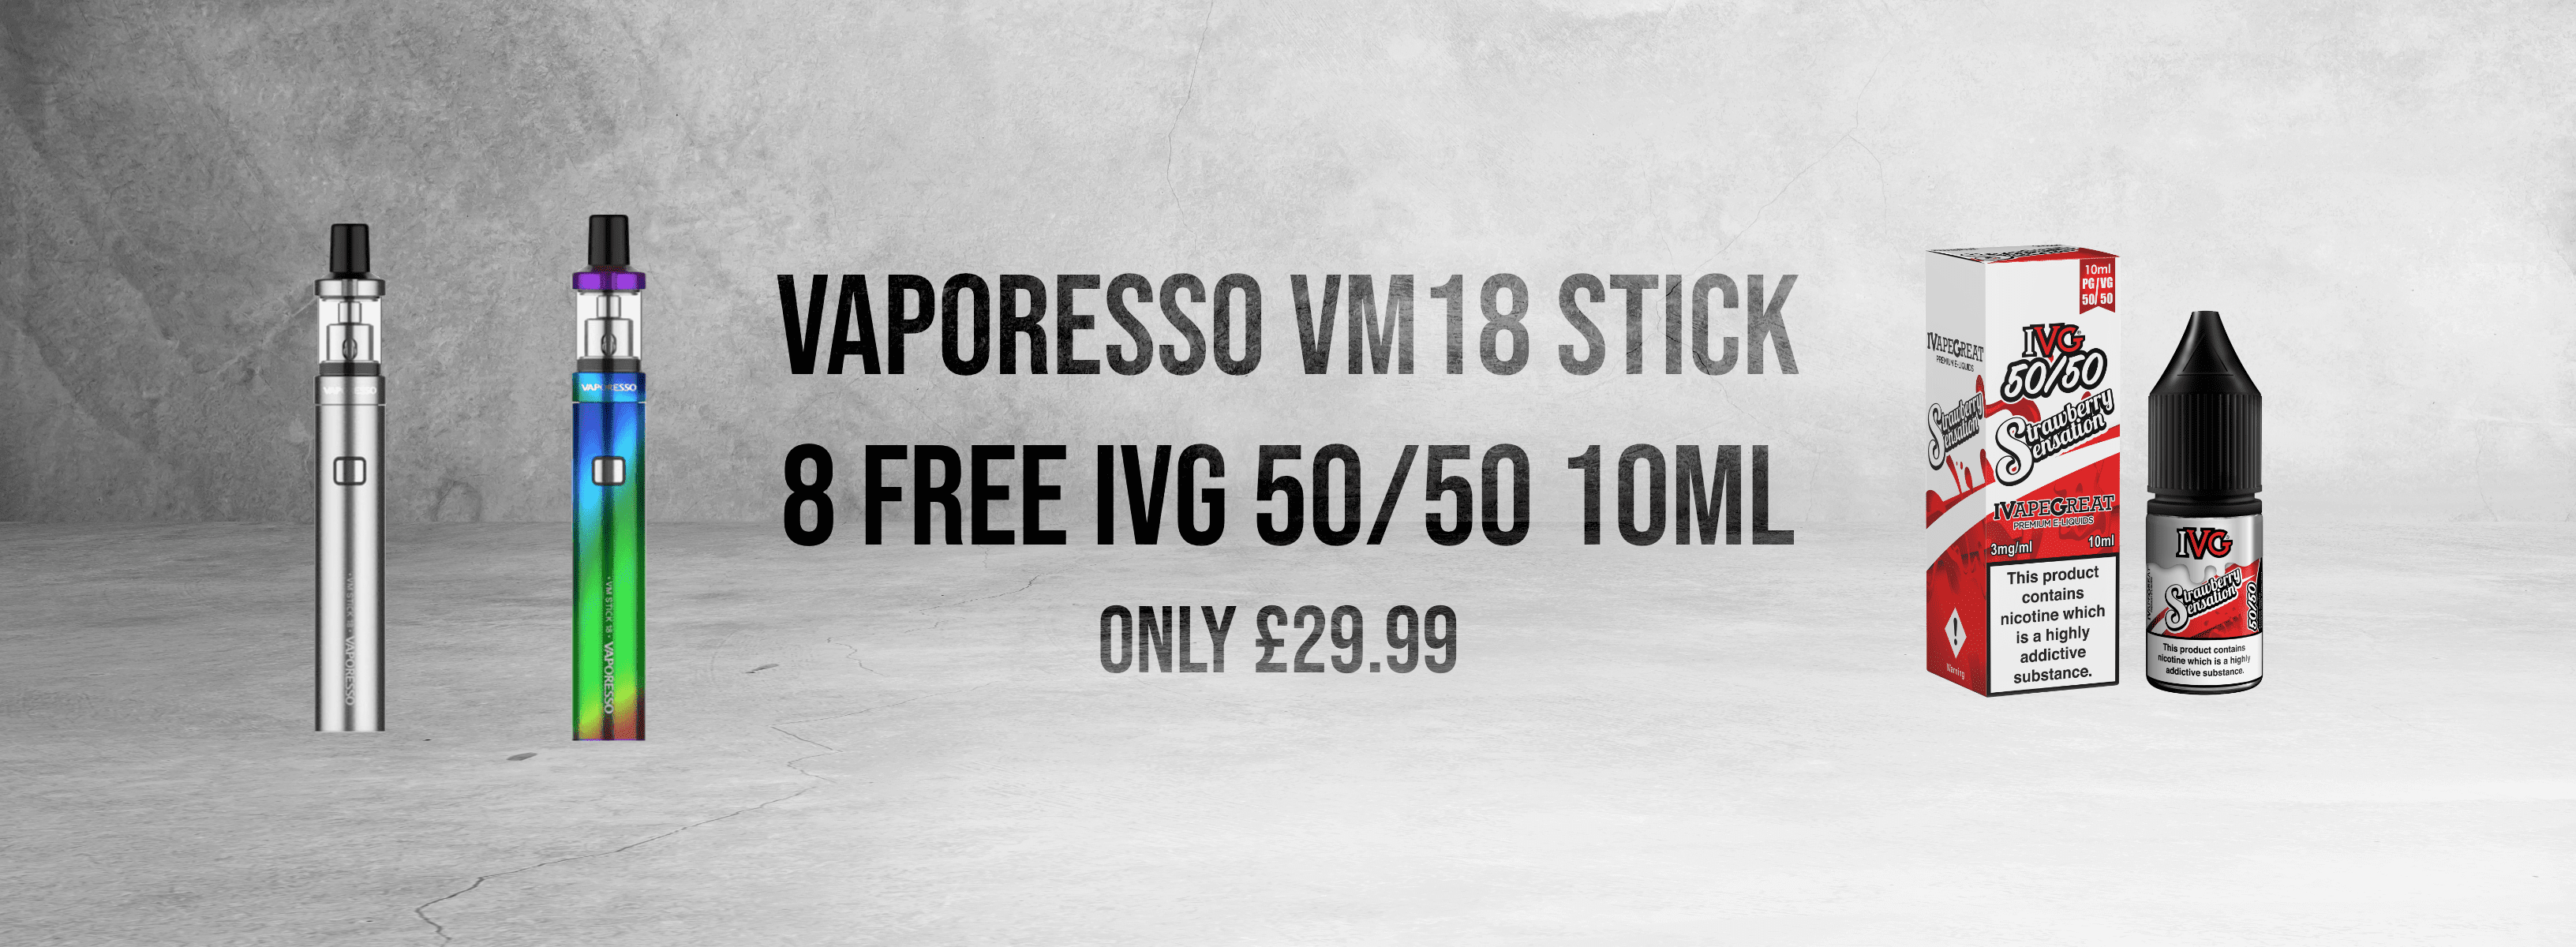 Advert for an offer on Vaporesso and IVG 50/50 products